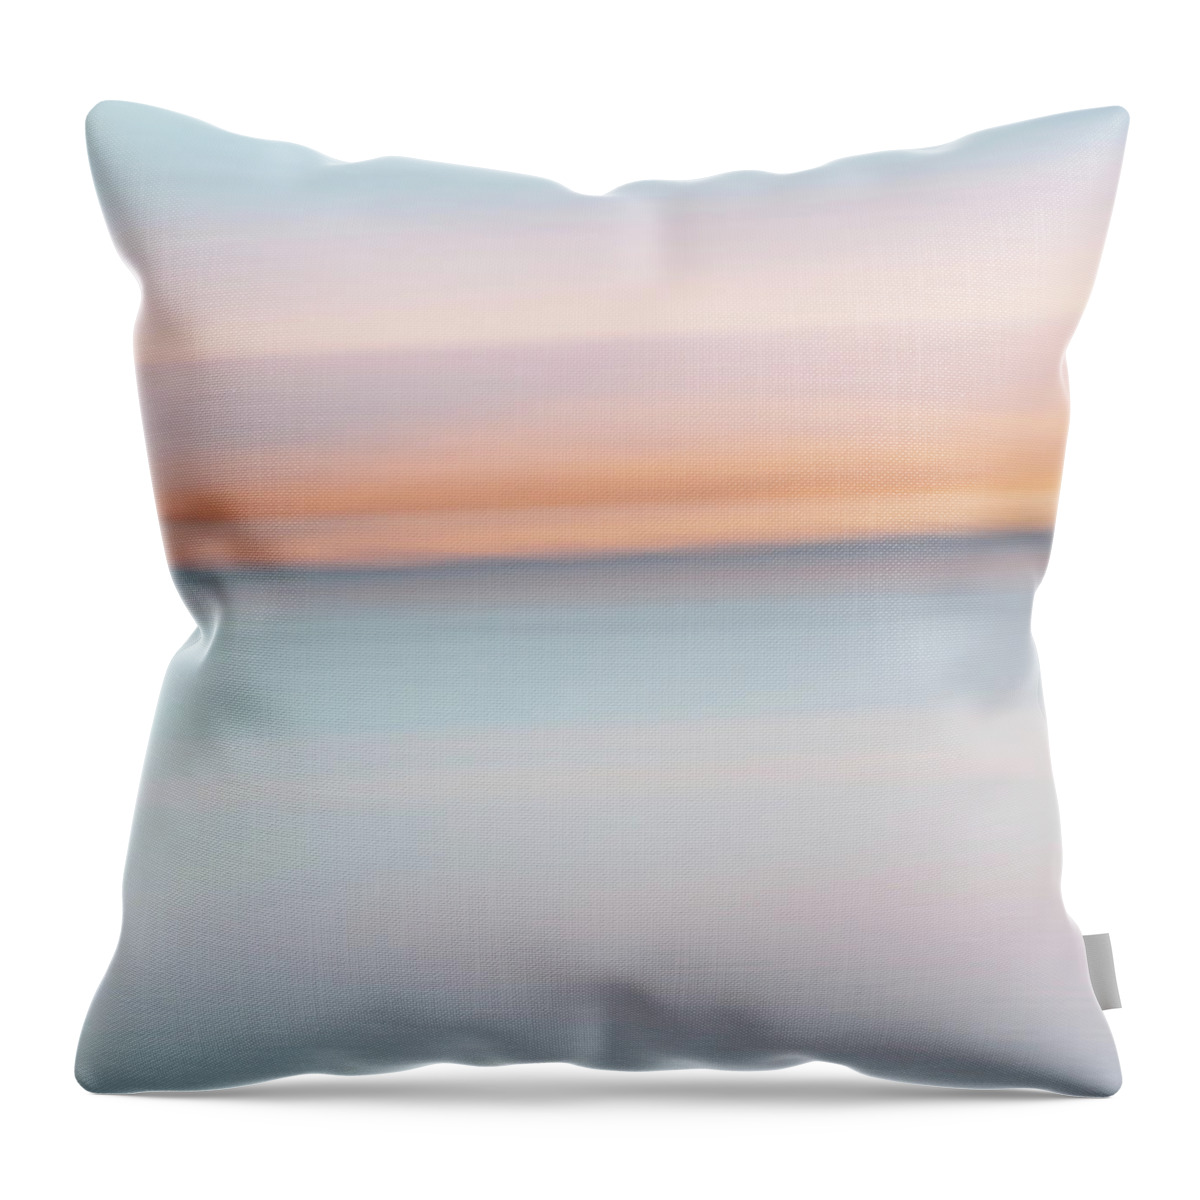 Lakeside Throw Pillow featuring the photograph Lakeside Abstract by Catherine Lau